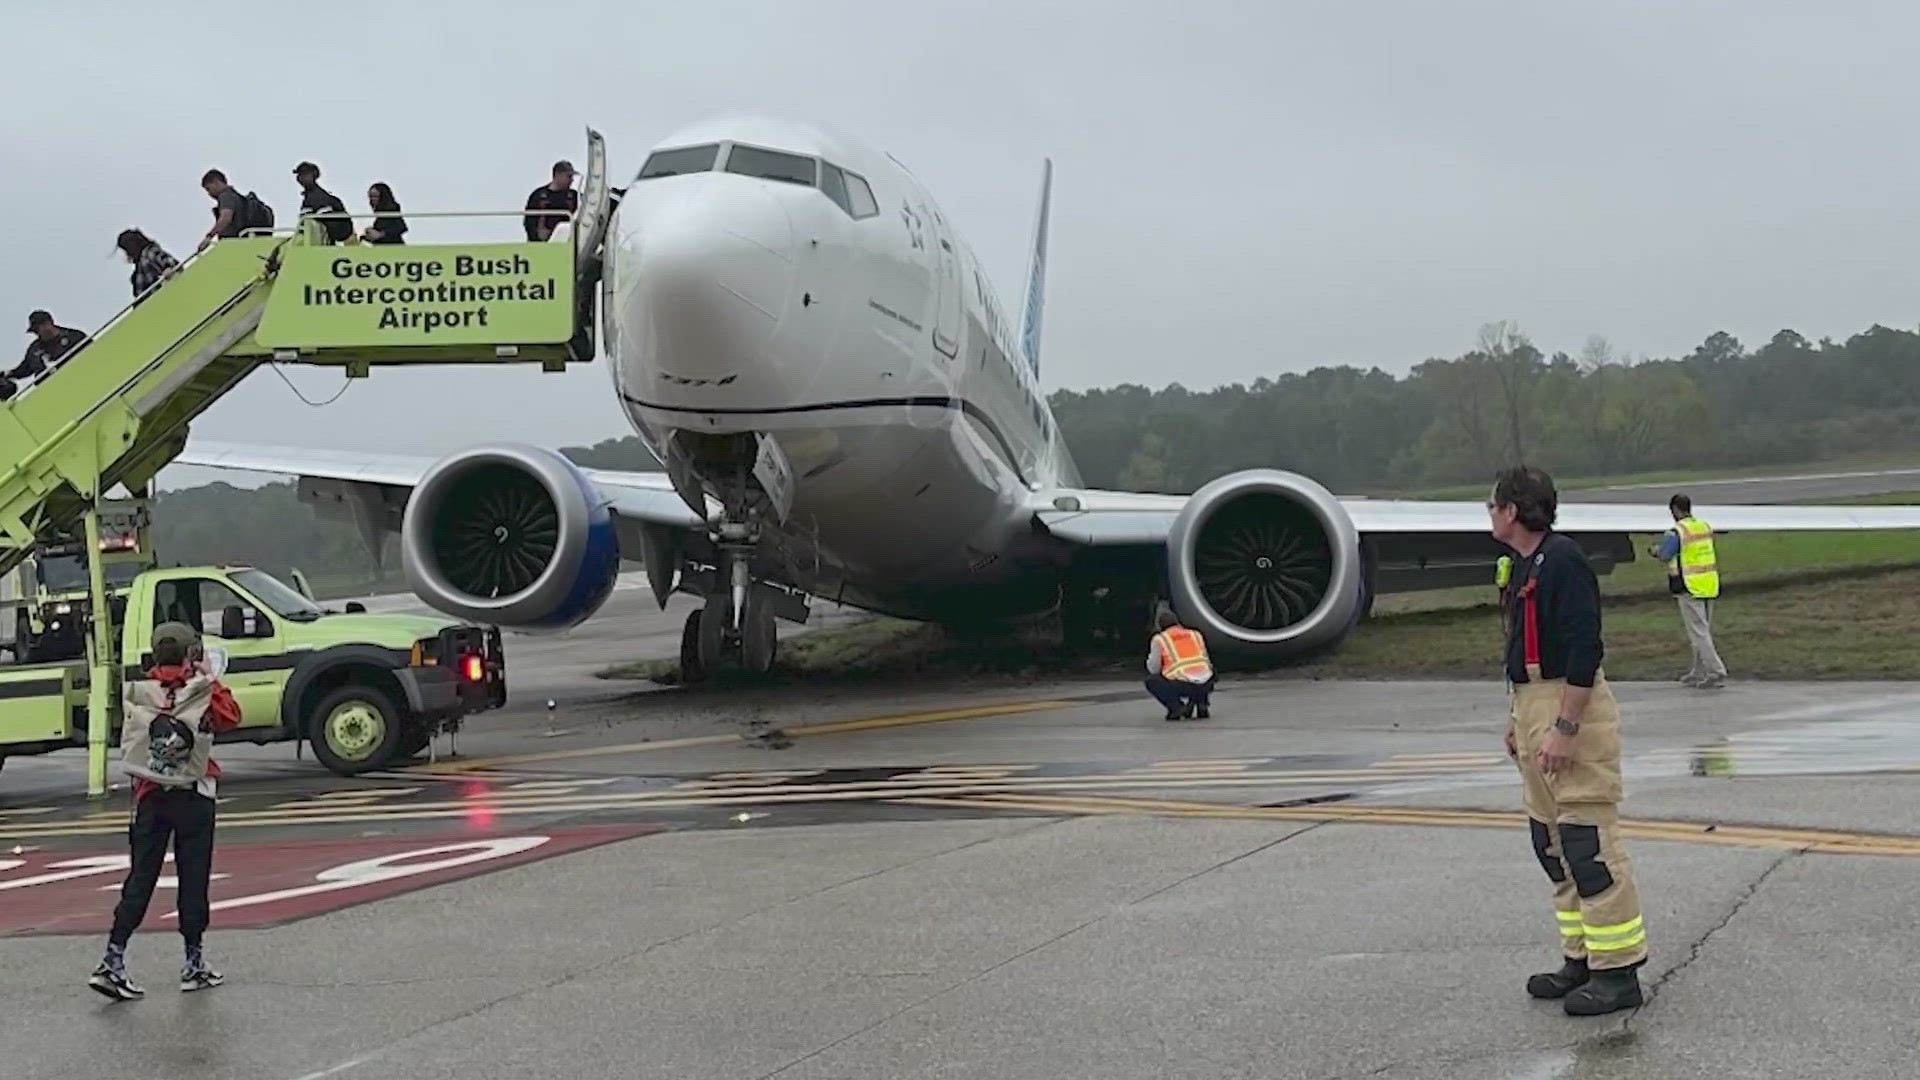 According to United, the flight from Memphis landed, but as it was leaving the runway to head to the gate, it went off the pavement and into the grass.